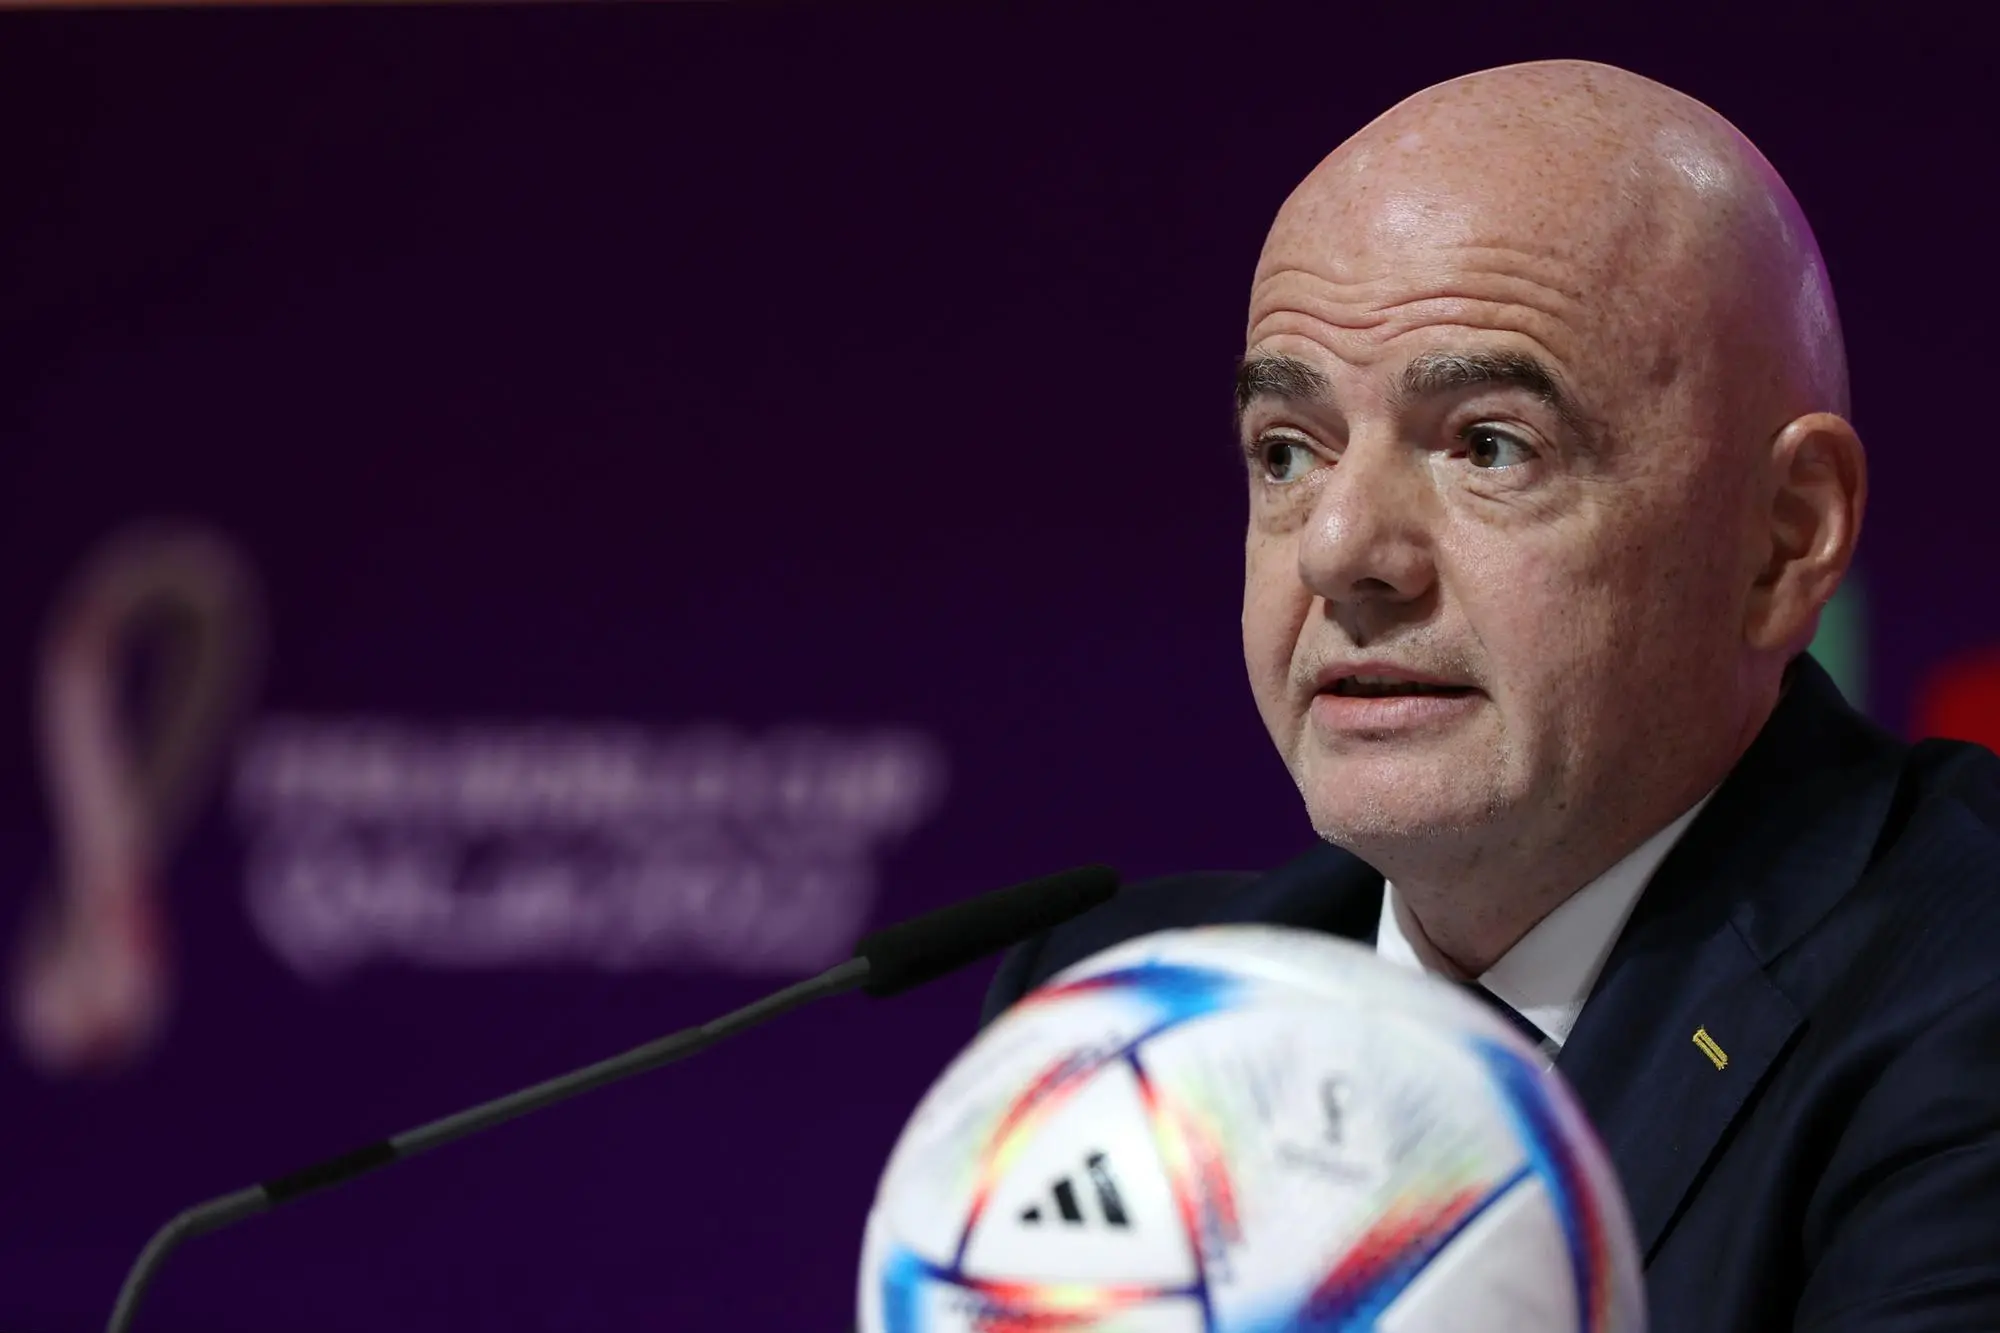 epa10313978 FIFA President Gianni Infantino addresses a press conference in Doha, Qatar, 19 November 2022. The FIFA World Cup Qatar 2022 will take place from 20 November to 18 December 2022. EPA/MOAHAMED MESSARA